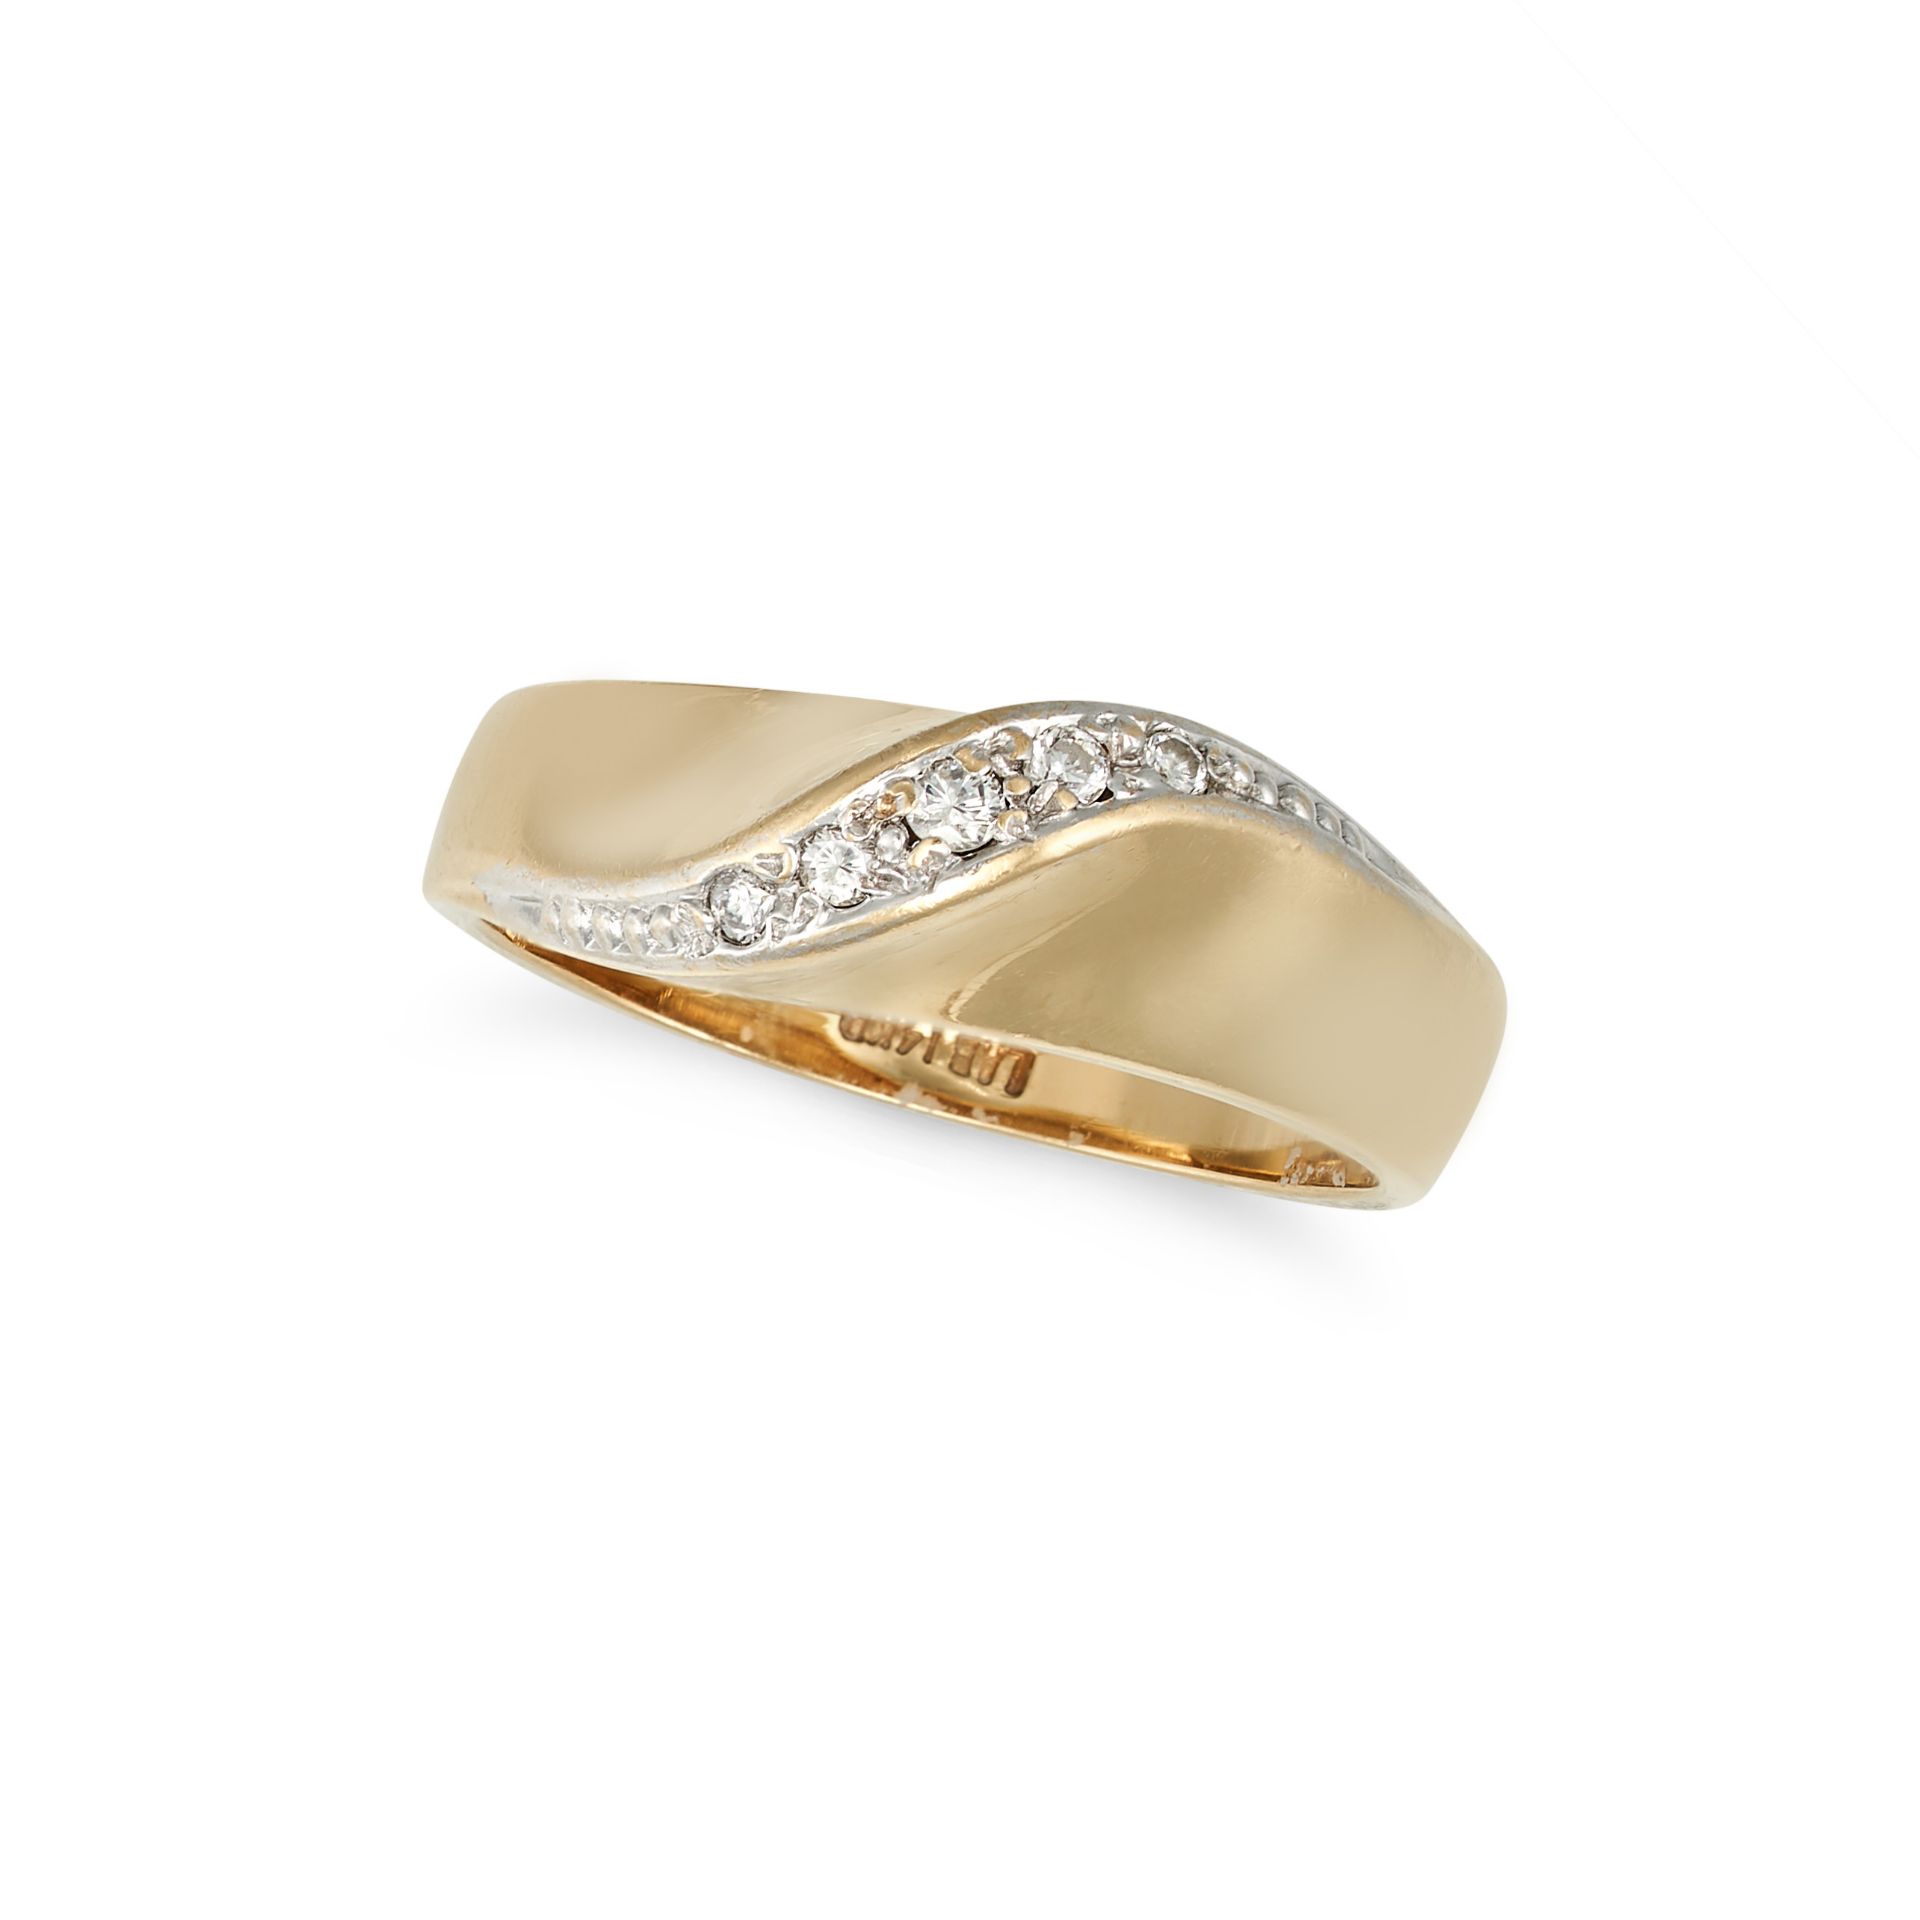 A DIAMOND RING in 14ct yellow gold, set with a row of round brilliant cut diamonds, stamped 14K, ...